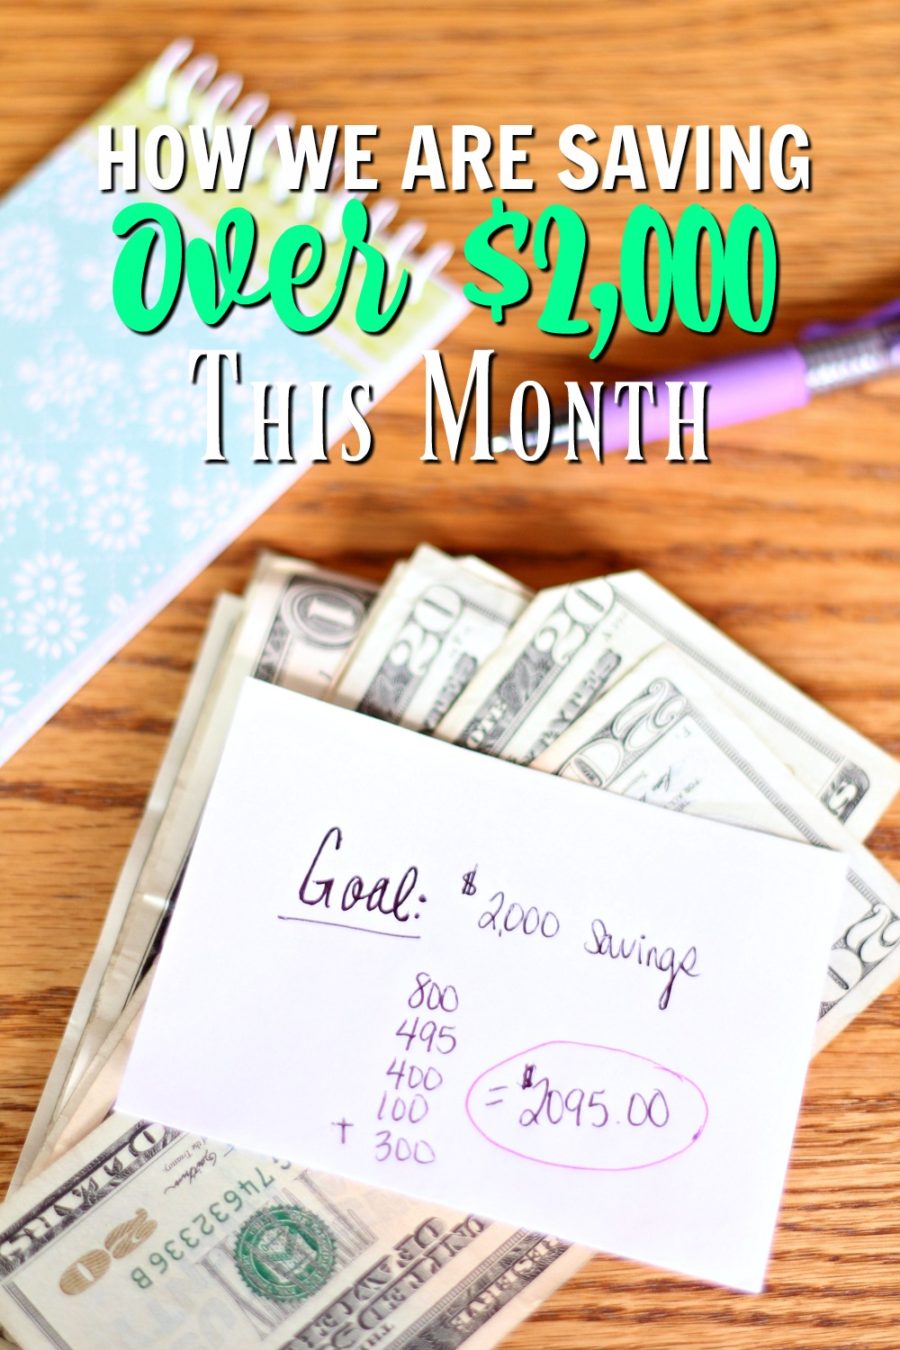 How We Are Saving Over $2000 This Month